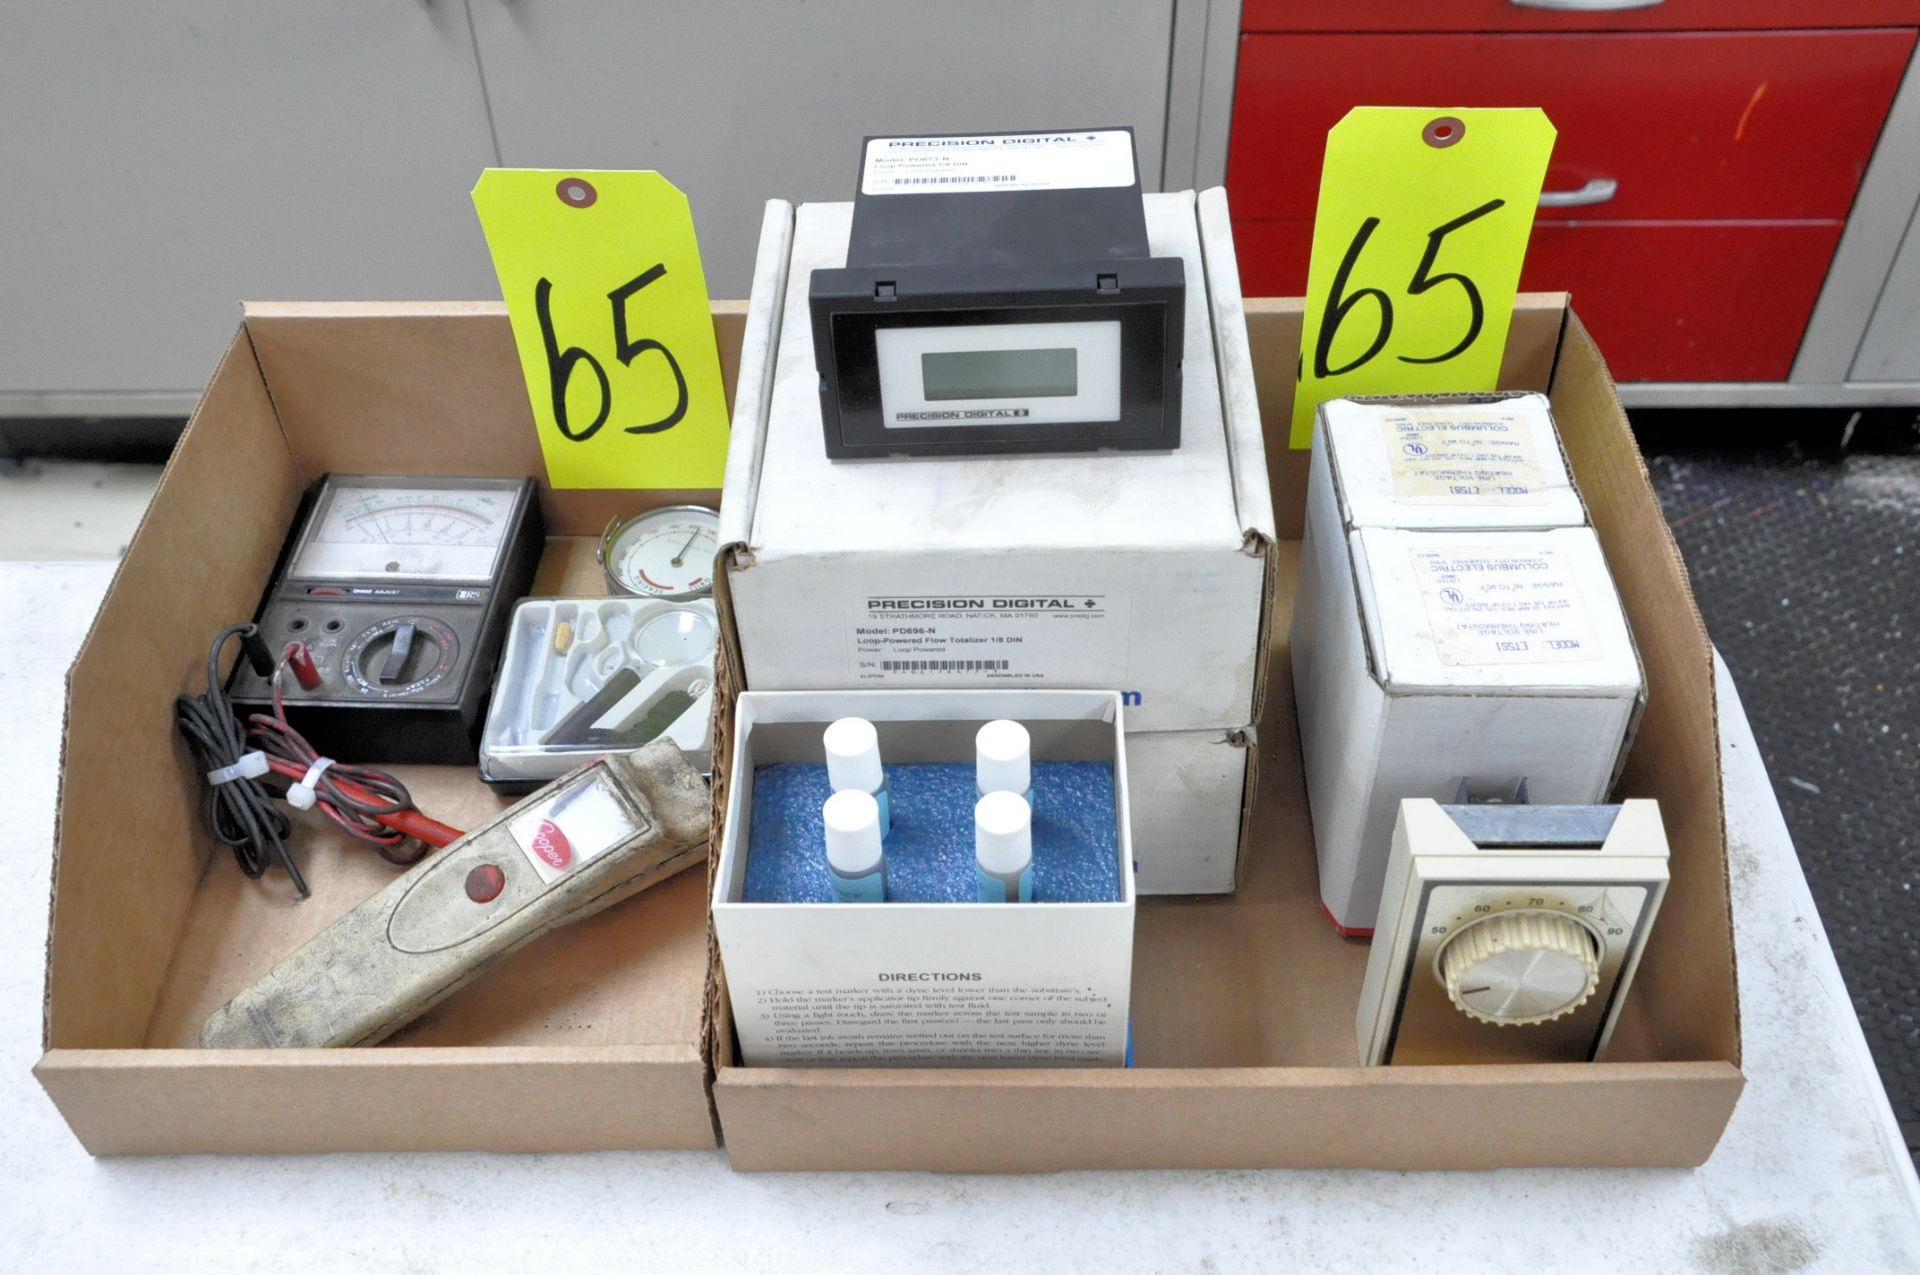 Lot-Precision Digital Loop Powered Flow Totalizer 1/8" Din Units, Thermostats and Various Testers in